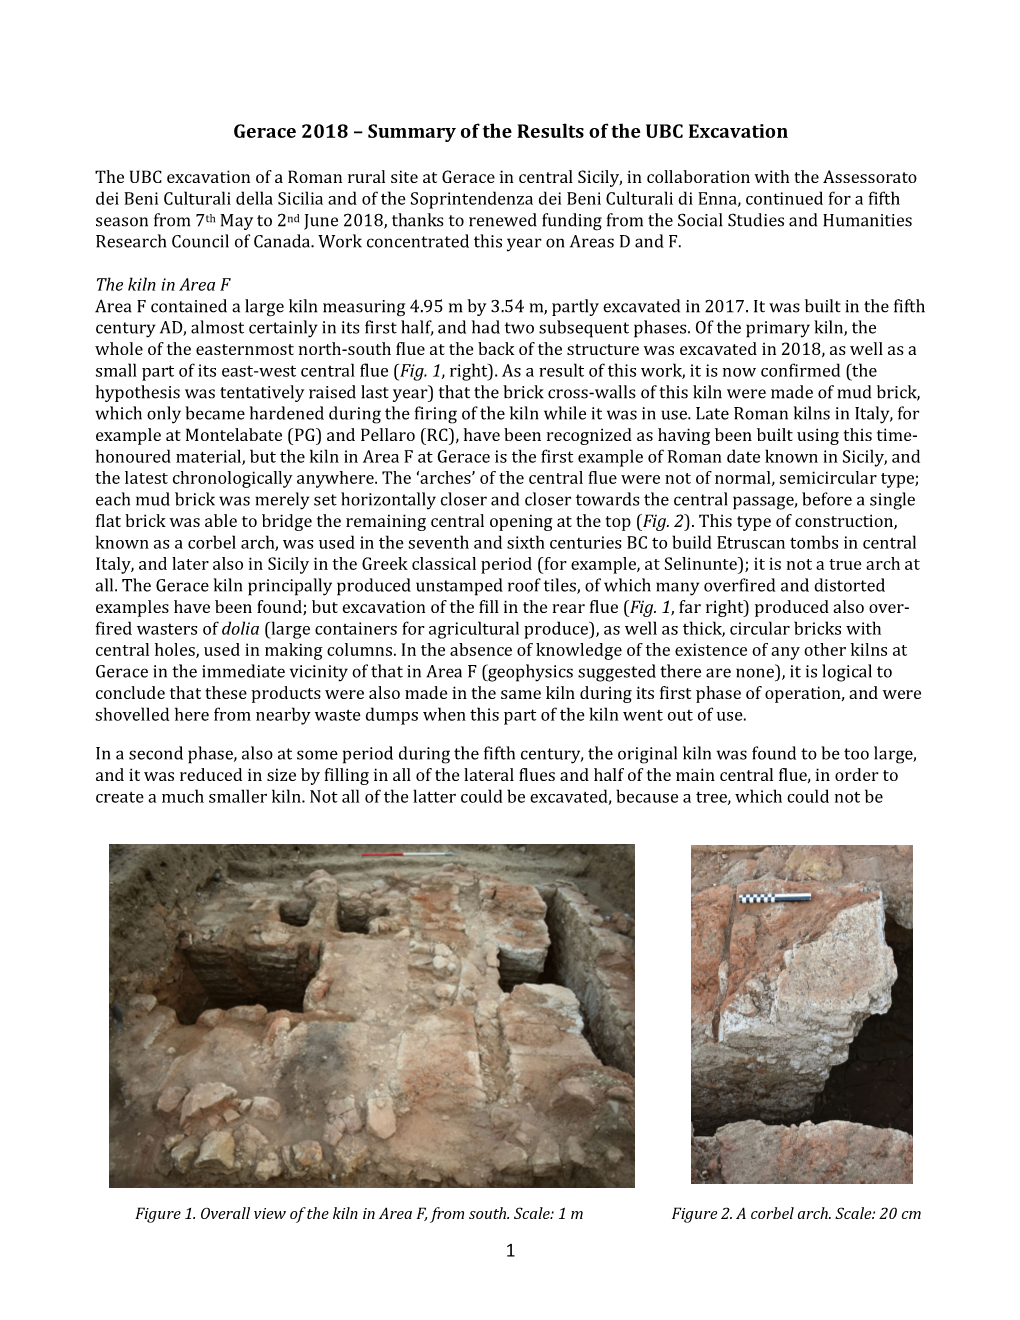 The UBC Excavation of a Roman Rural Site at Gerace in Central Sicily, In